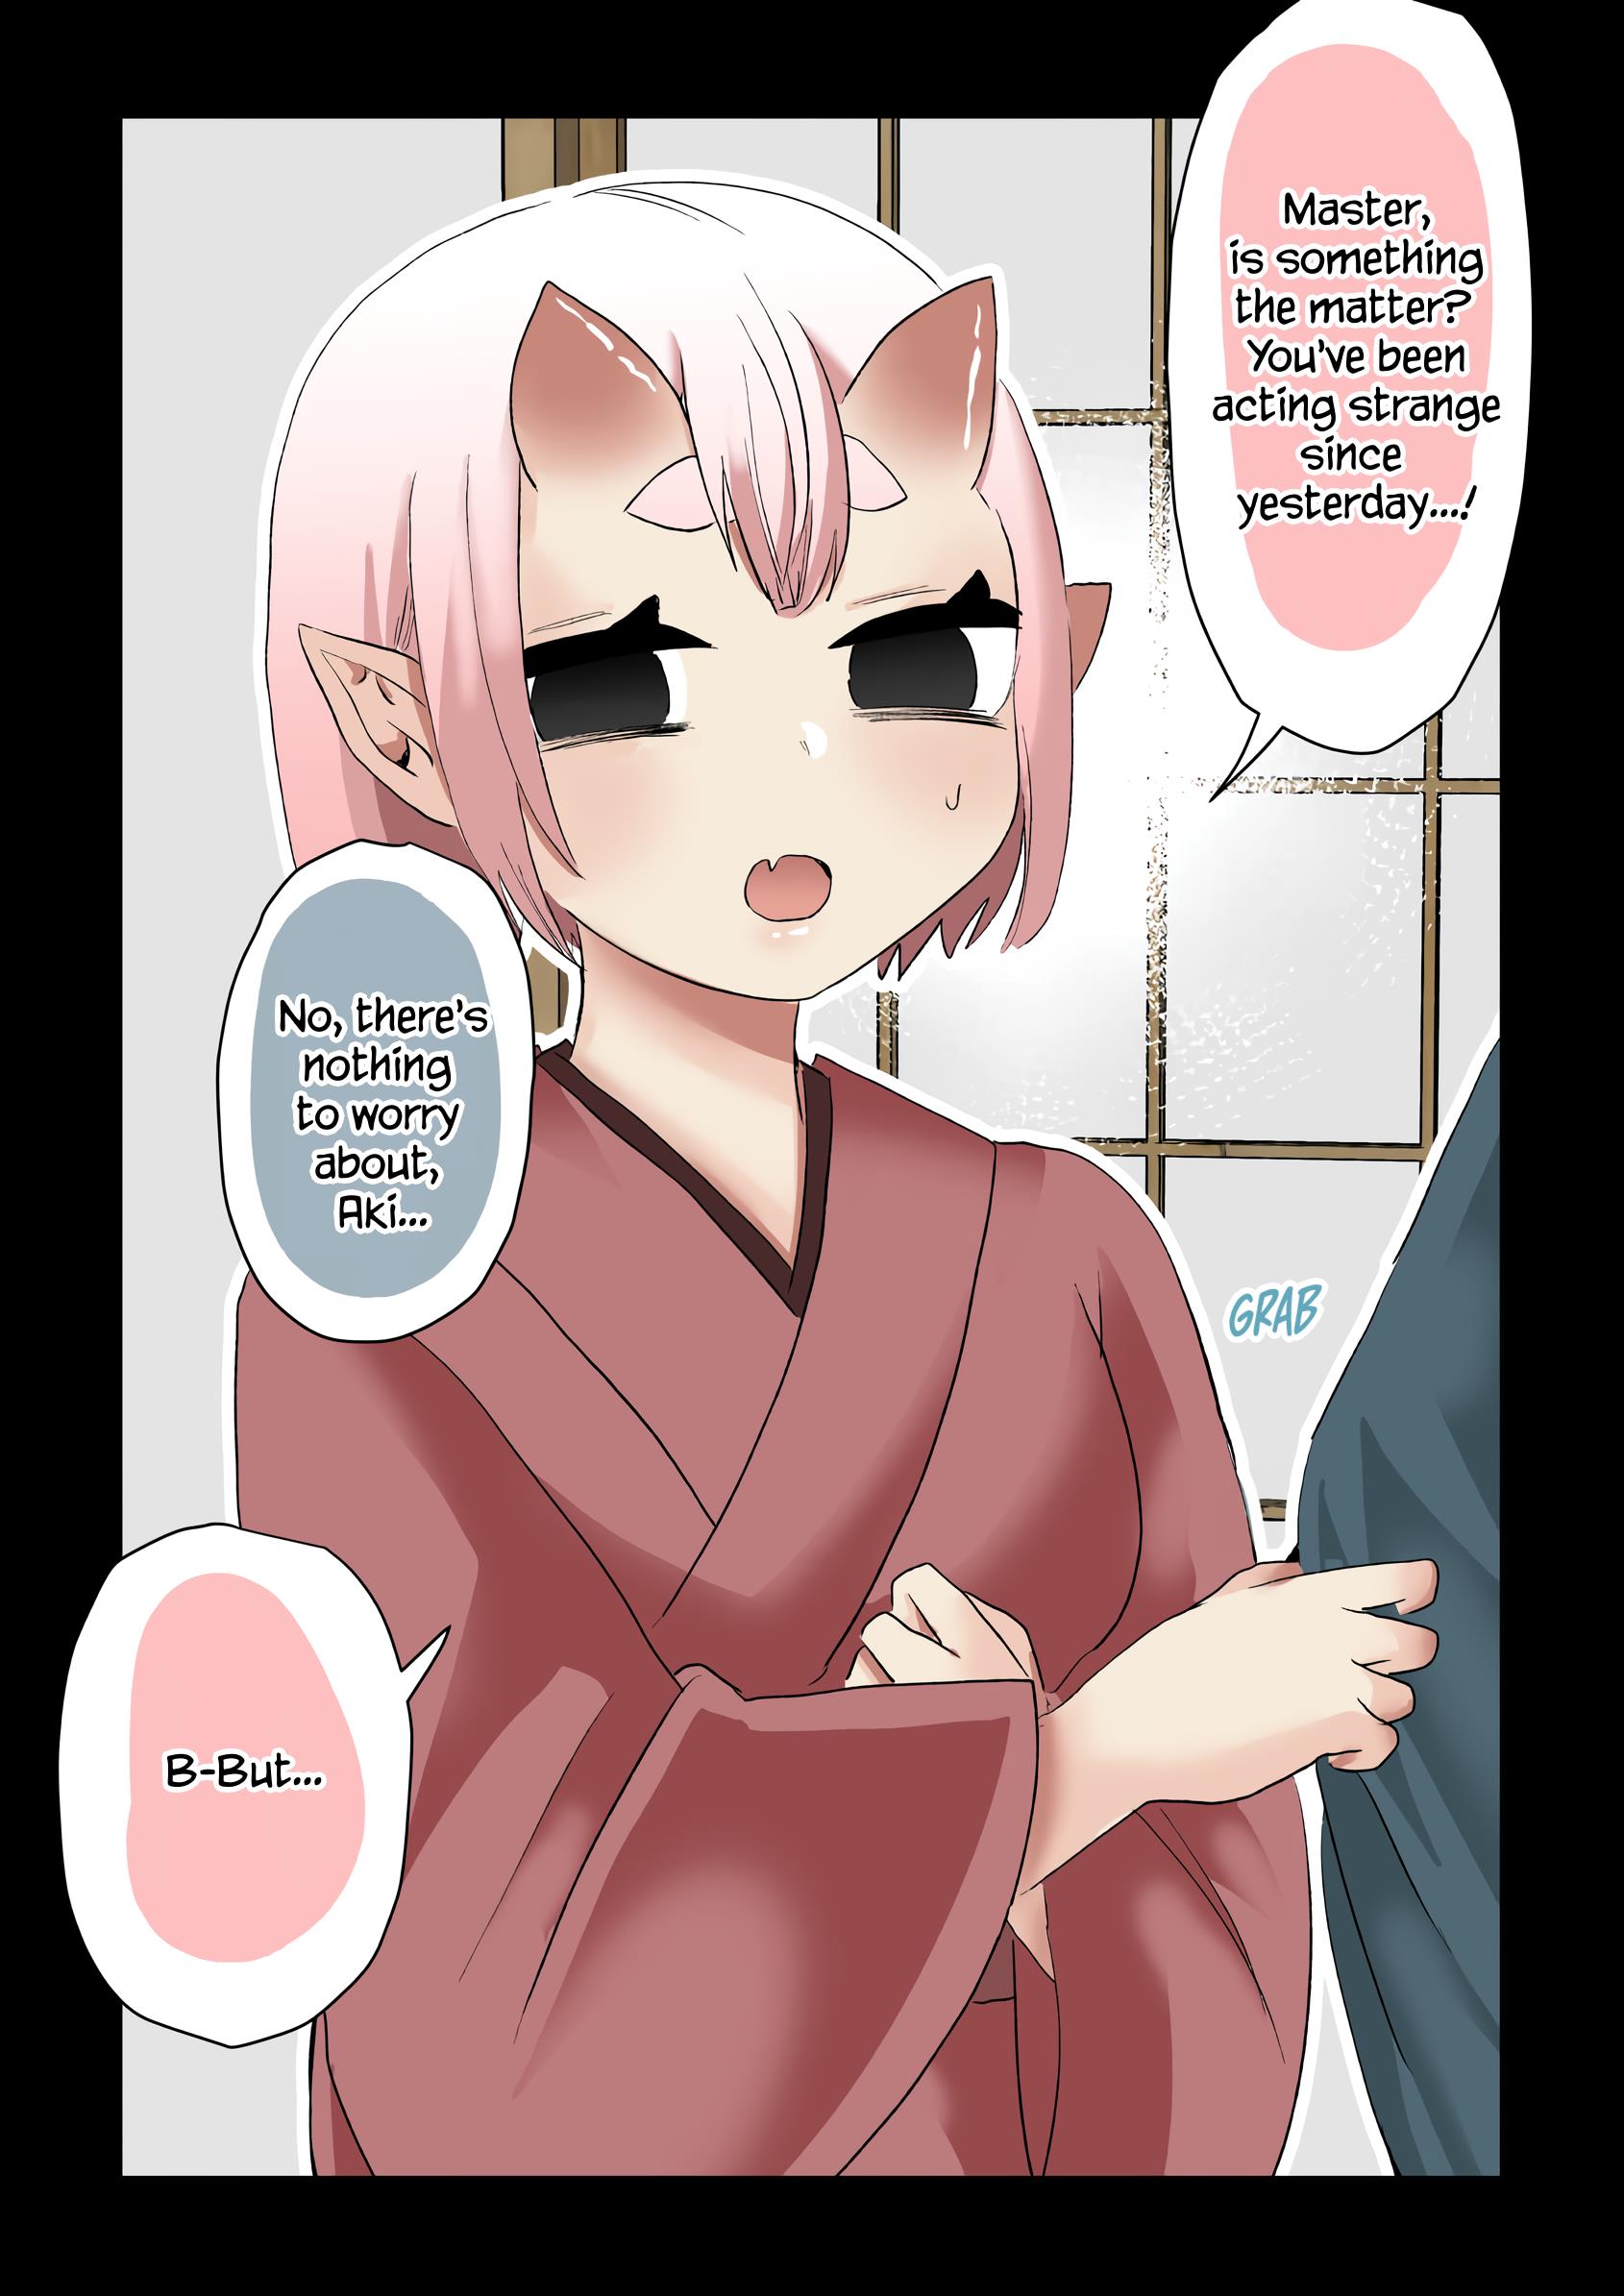 The Oni Bride Who Married Into Our Family. - Page 1